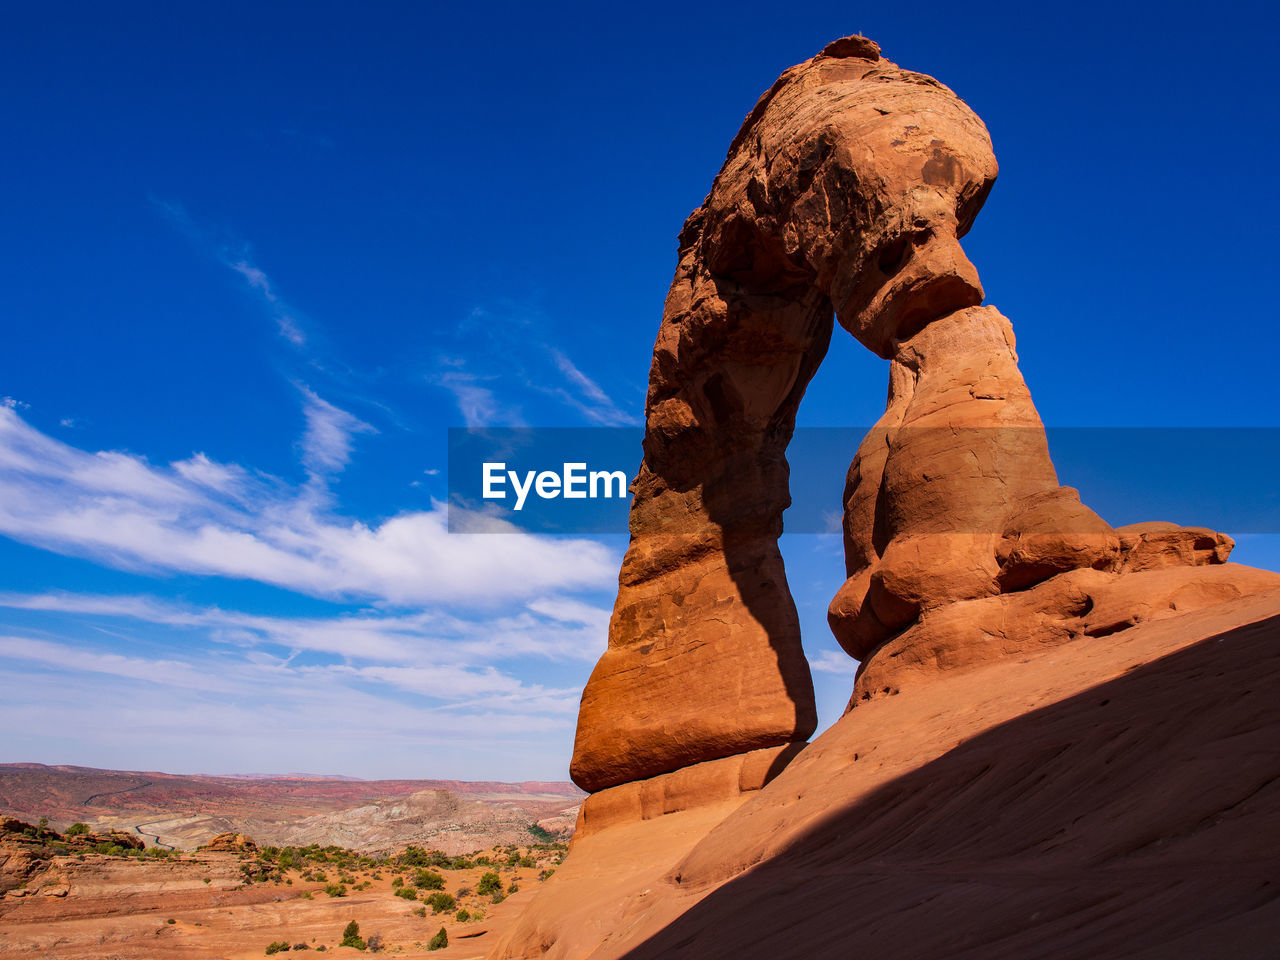 Delicate arch with intense blue sky in arches national park, utah.